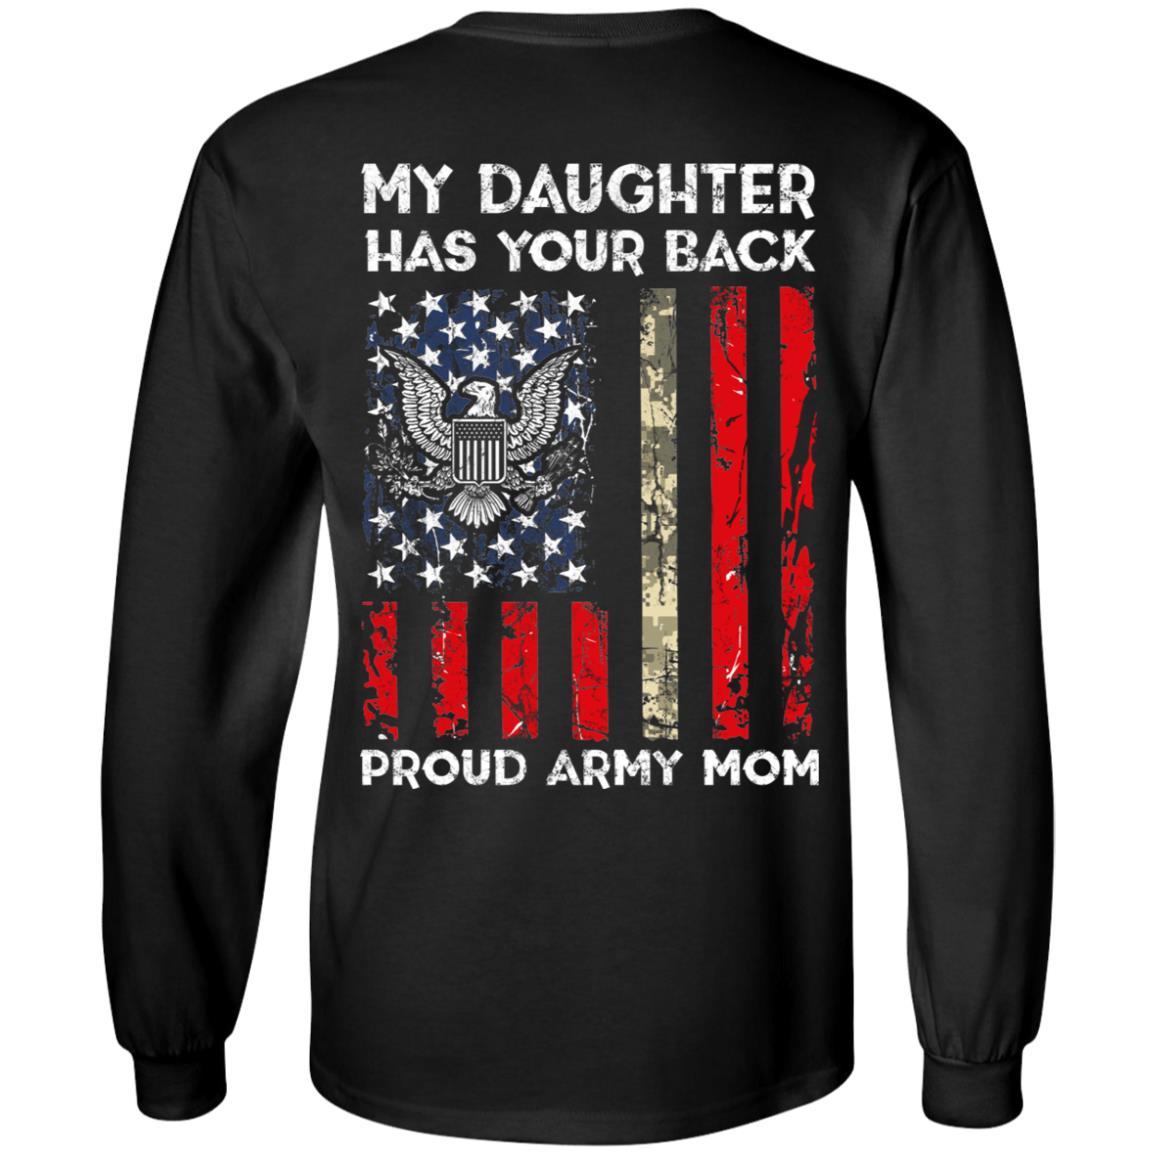 My Daughter Has Your Back - Proud Army Mom Men T Shirt On Back-TShirt-Army-Veterans Nation